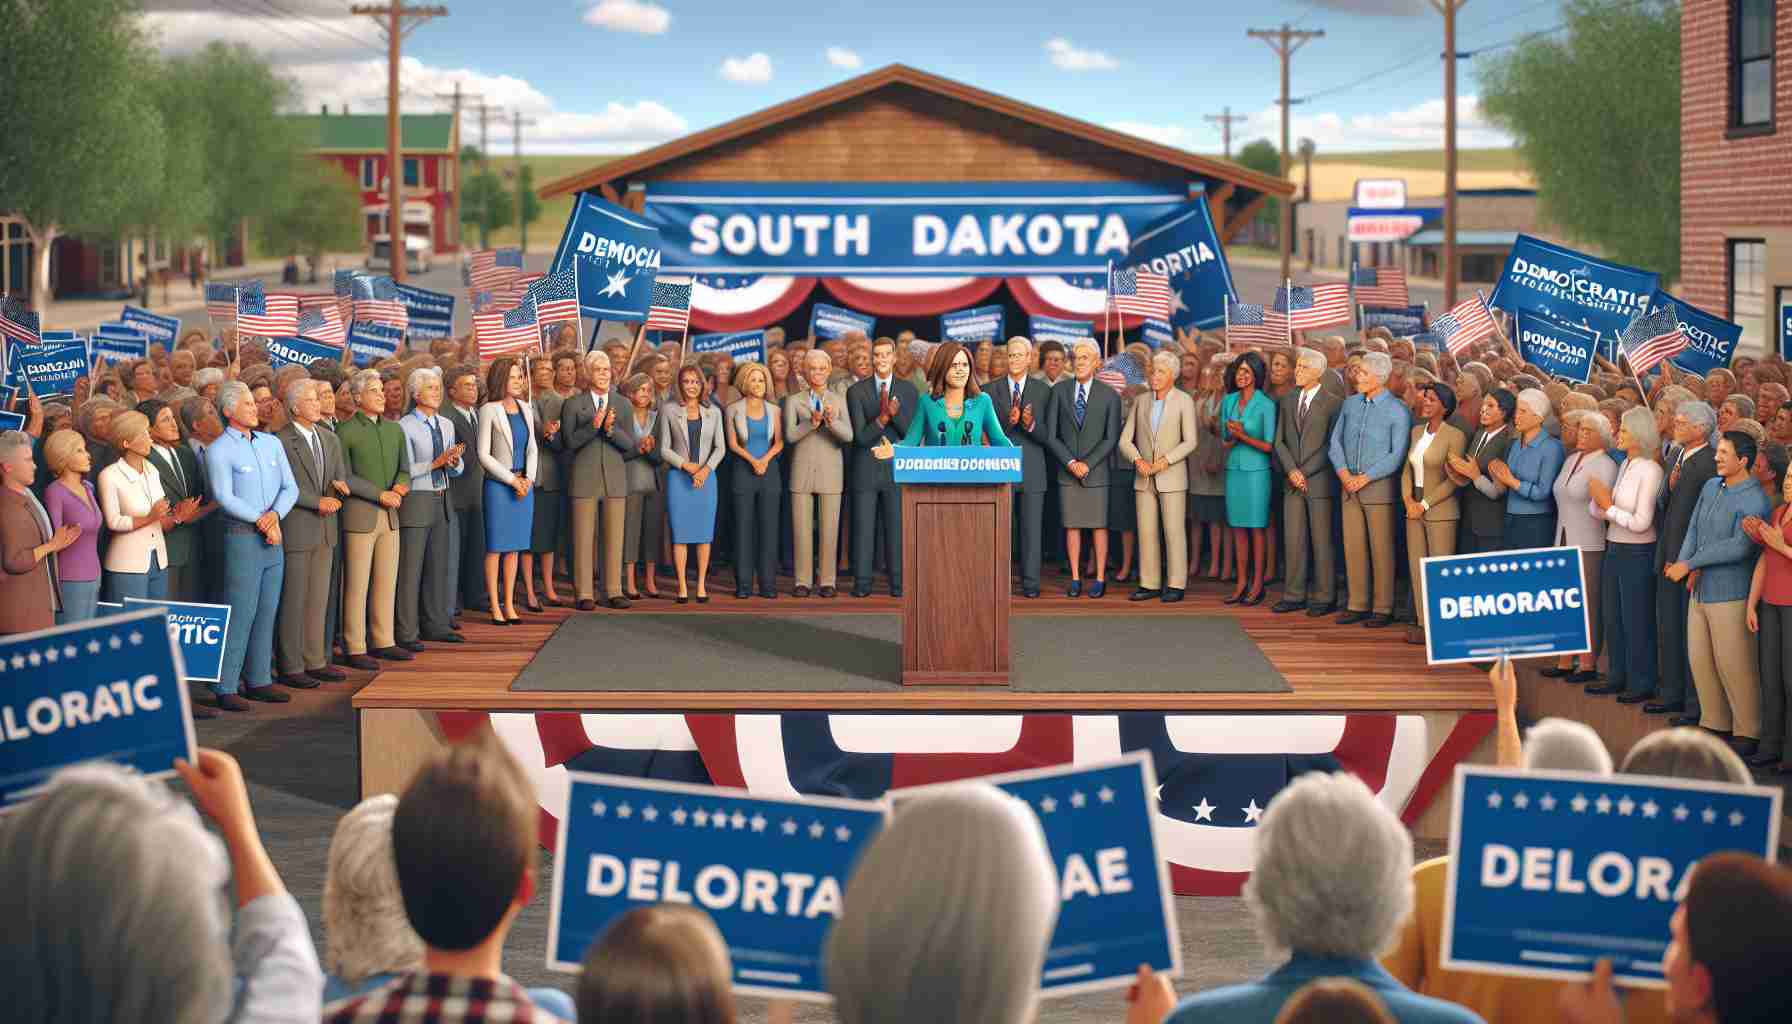 Realistic HD photo of a political rally in South Dakota with local Democratic party members officially endorsing an unidentified female politician for the 2020 Presidential election.